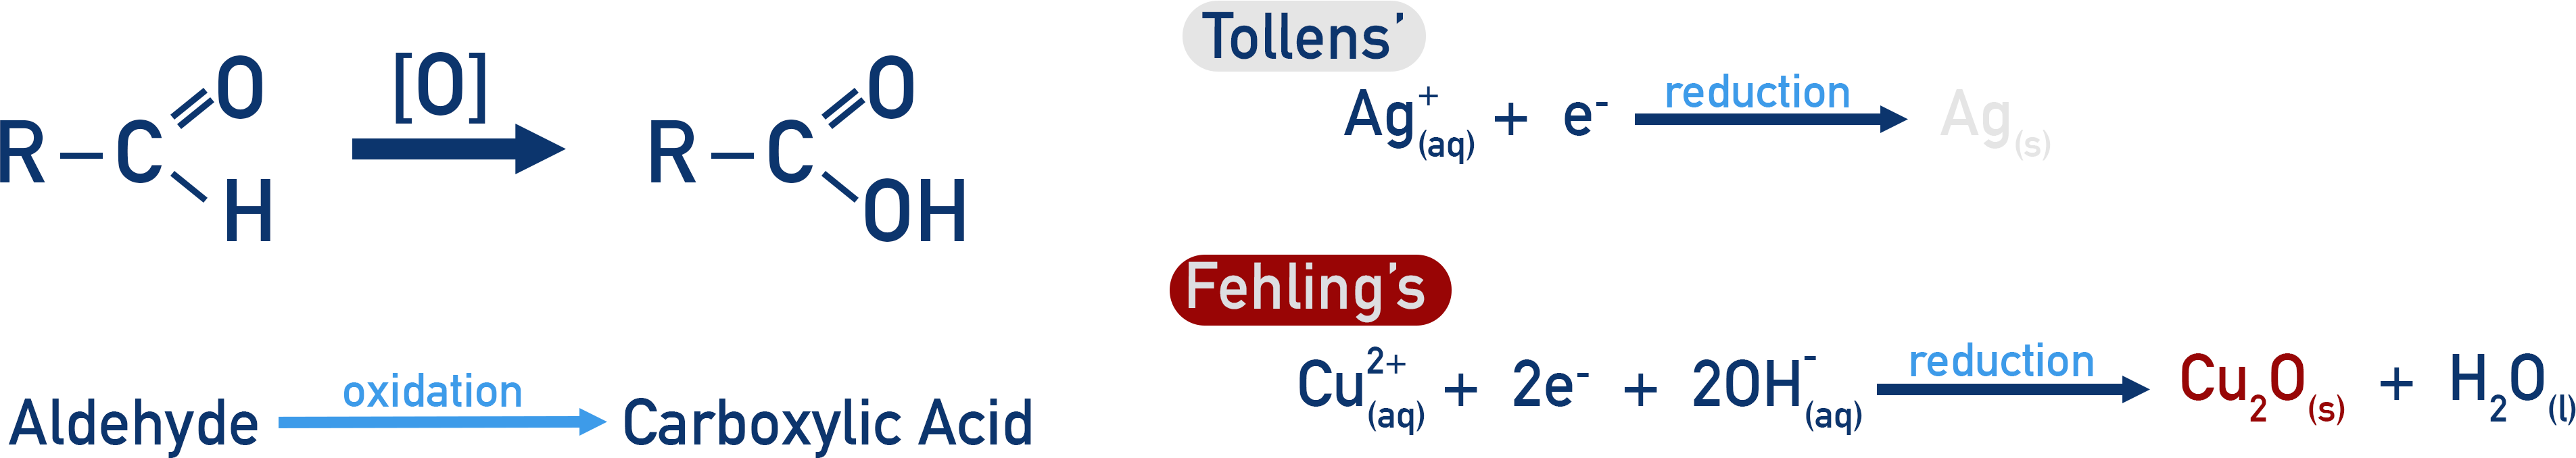 Tollens' Reagent Fehlings Solution aldehyde oxidation carboxylic acid